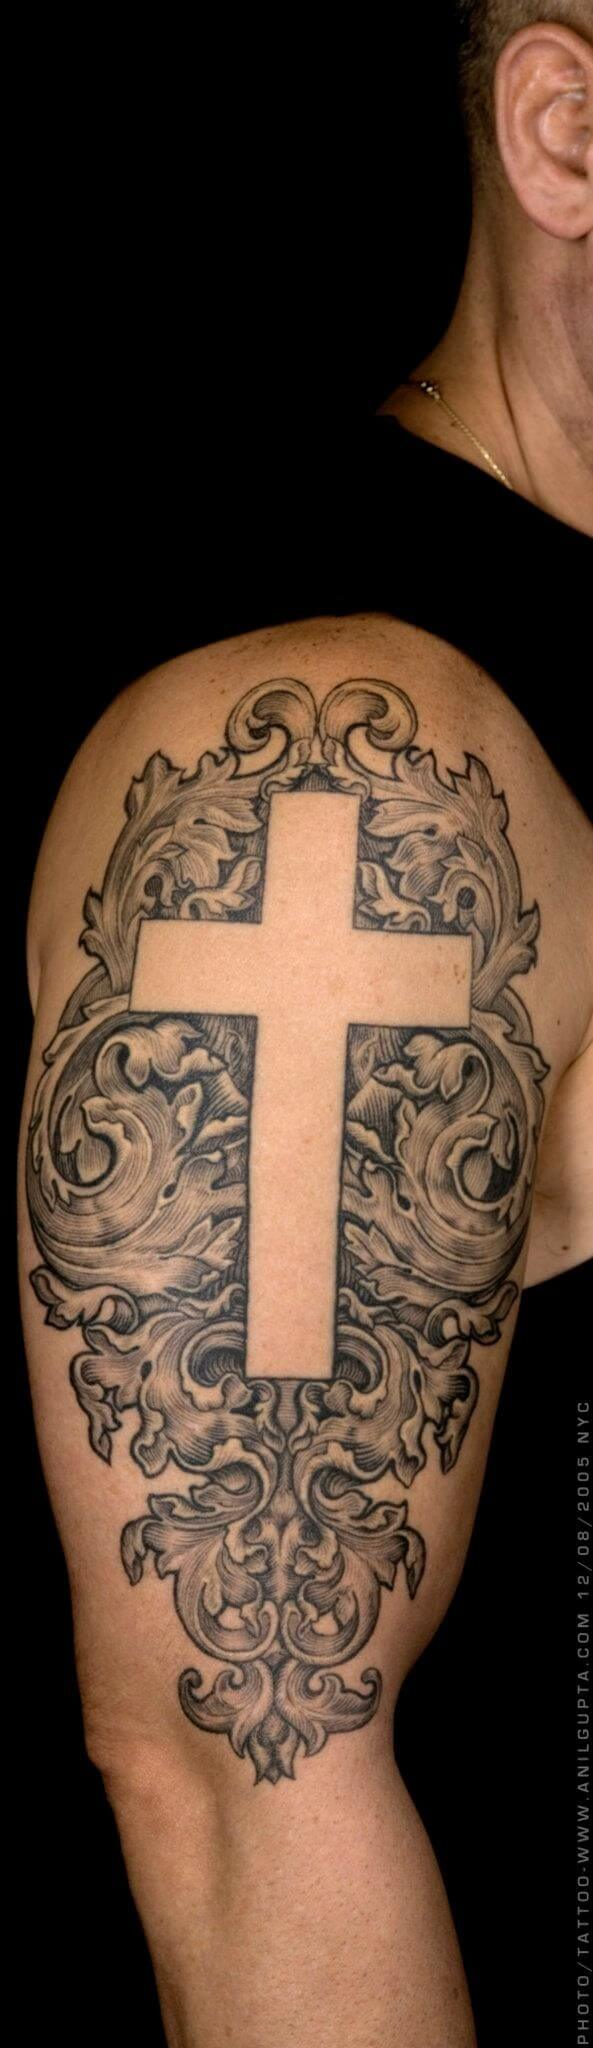 56 Best Cross Tattoos For Men Improb in sizing 593 X 2048